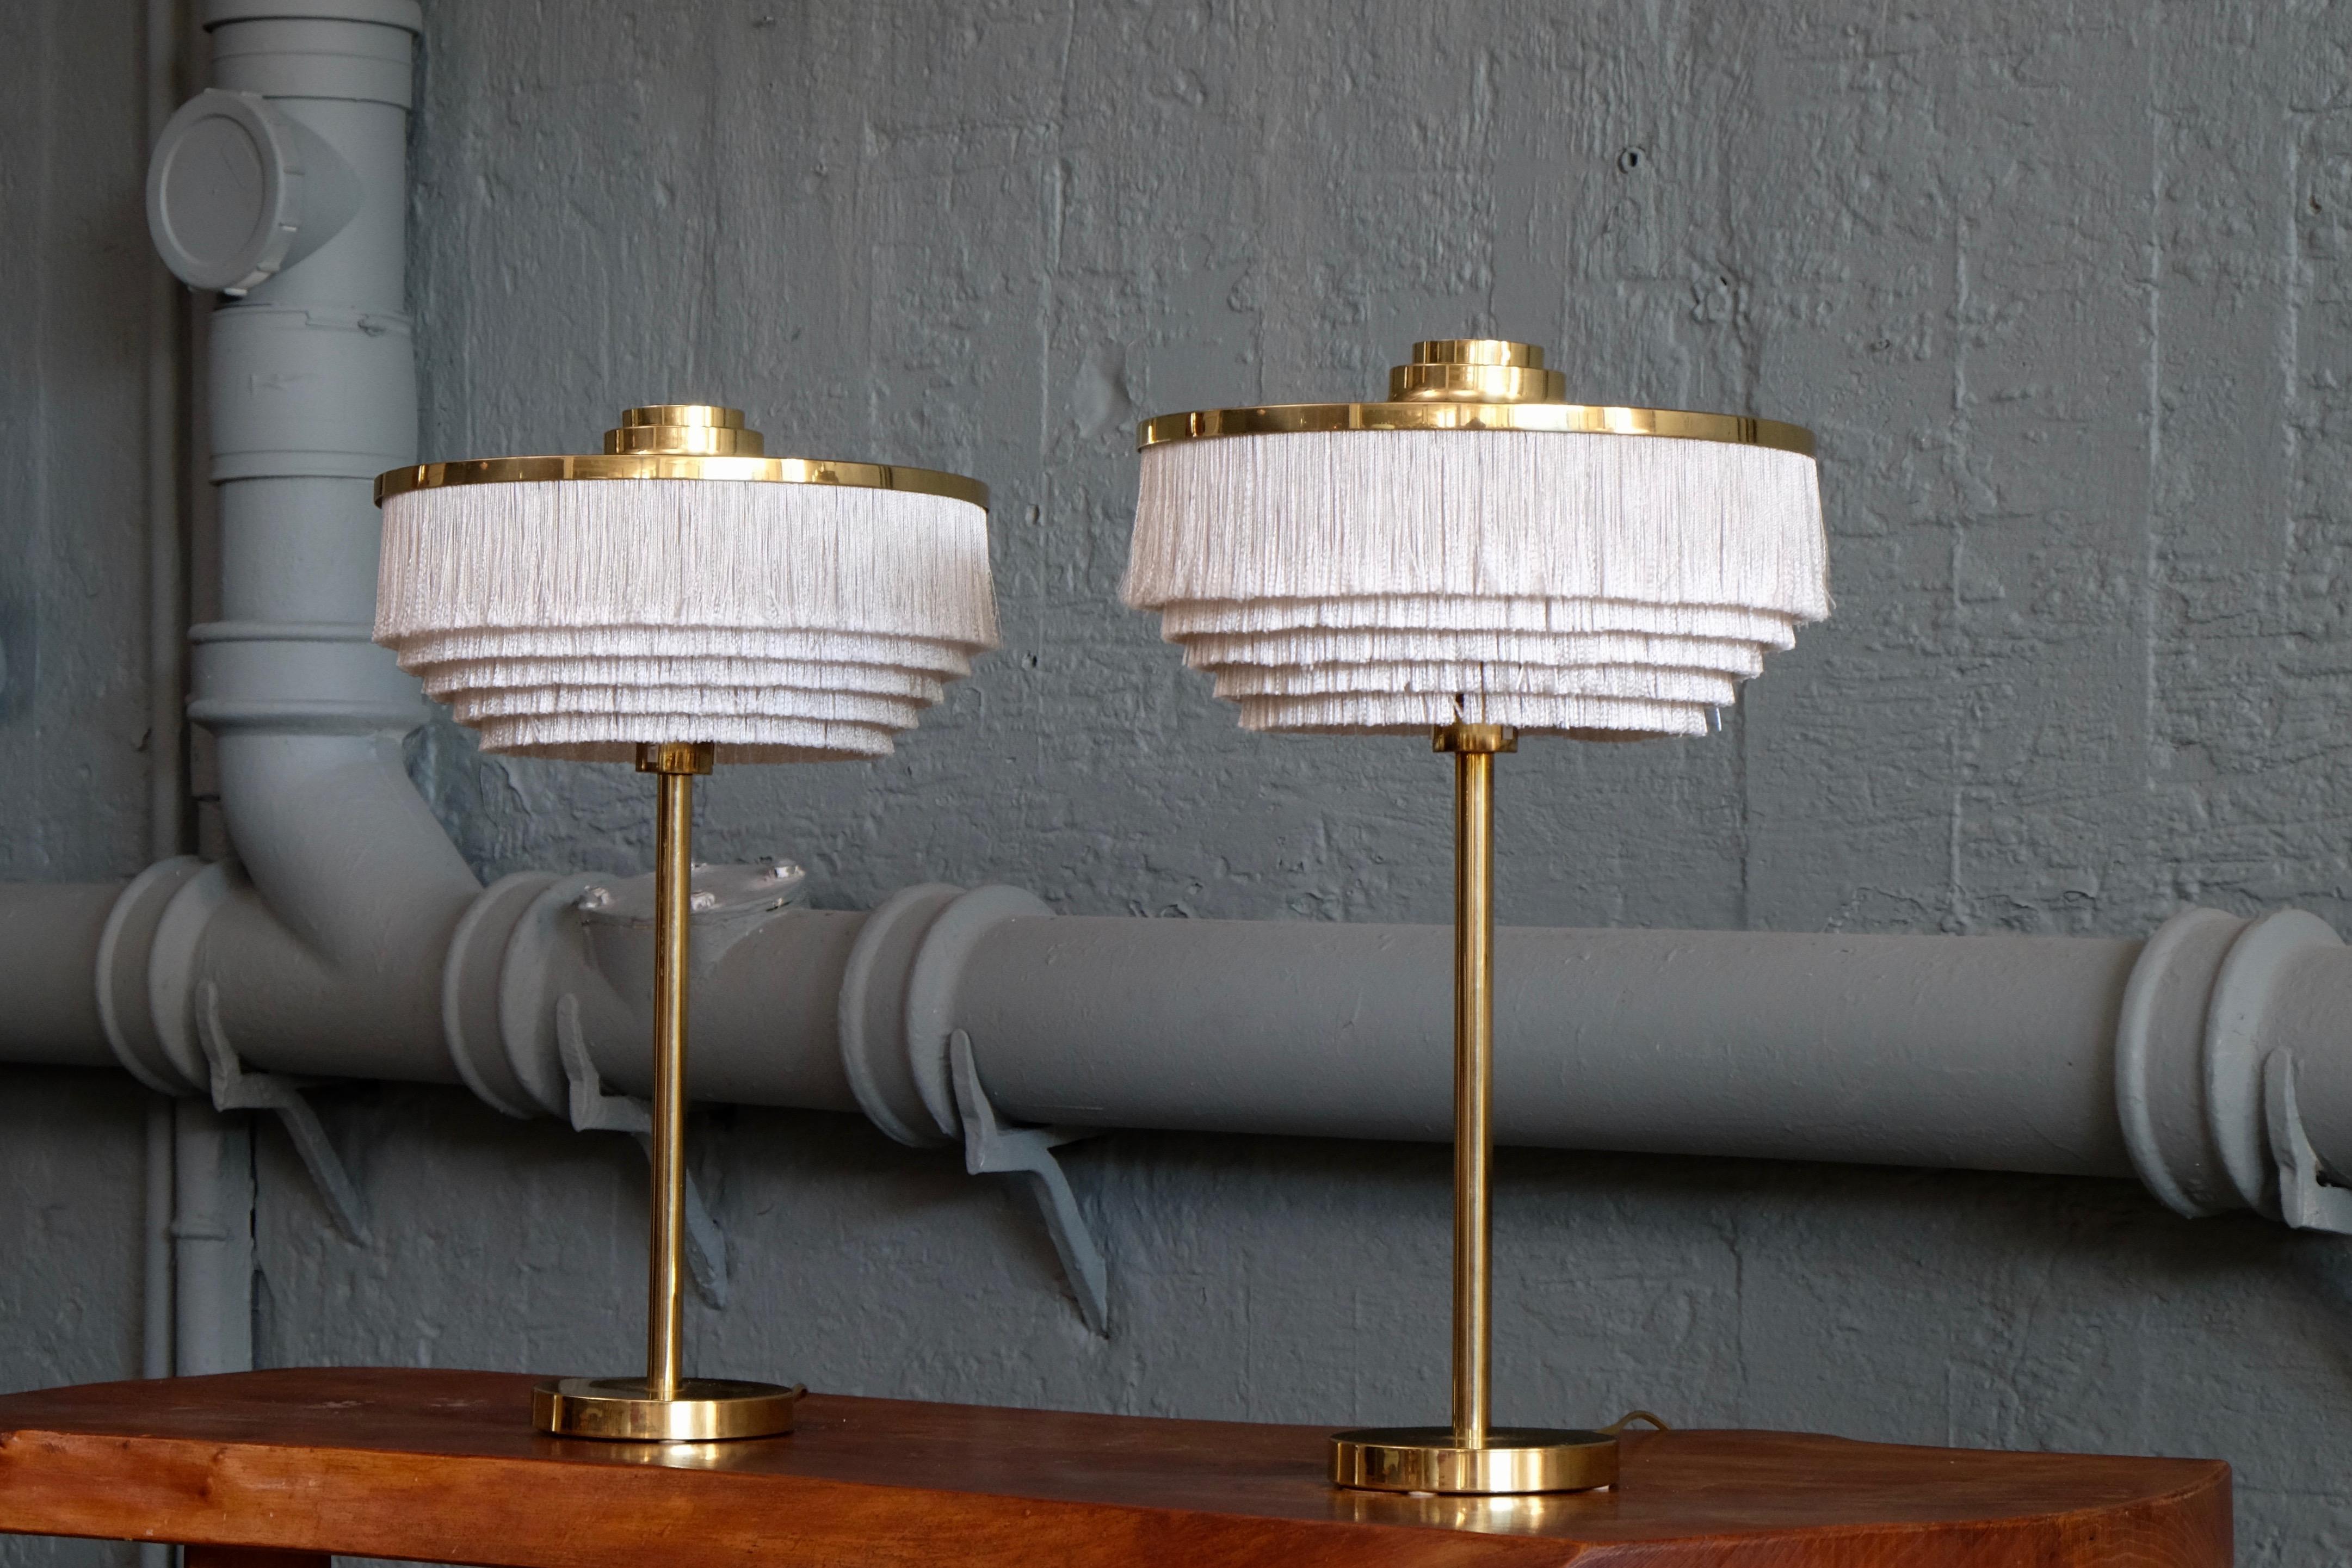 Rare pair of white table lamps produced by Hans-Agne Jakobsson in Markaryd, Sweden.
New wiring. Excellent condition.